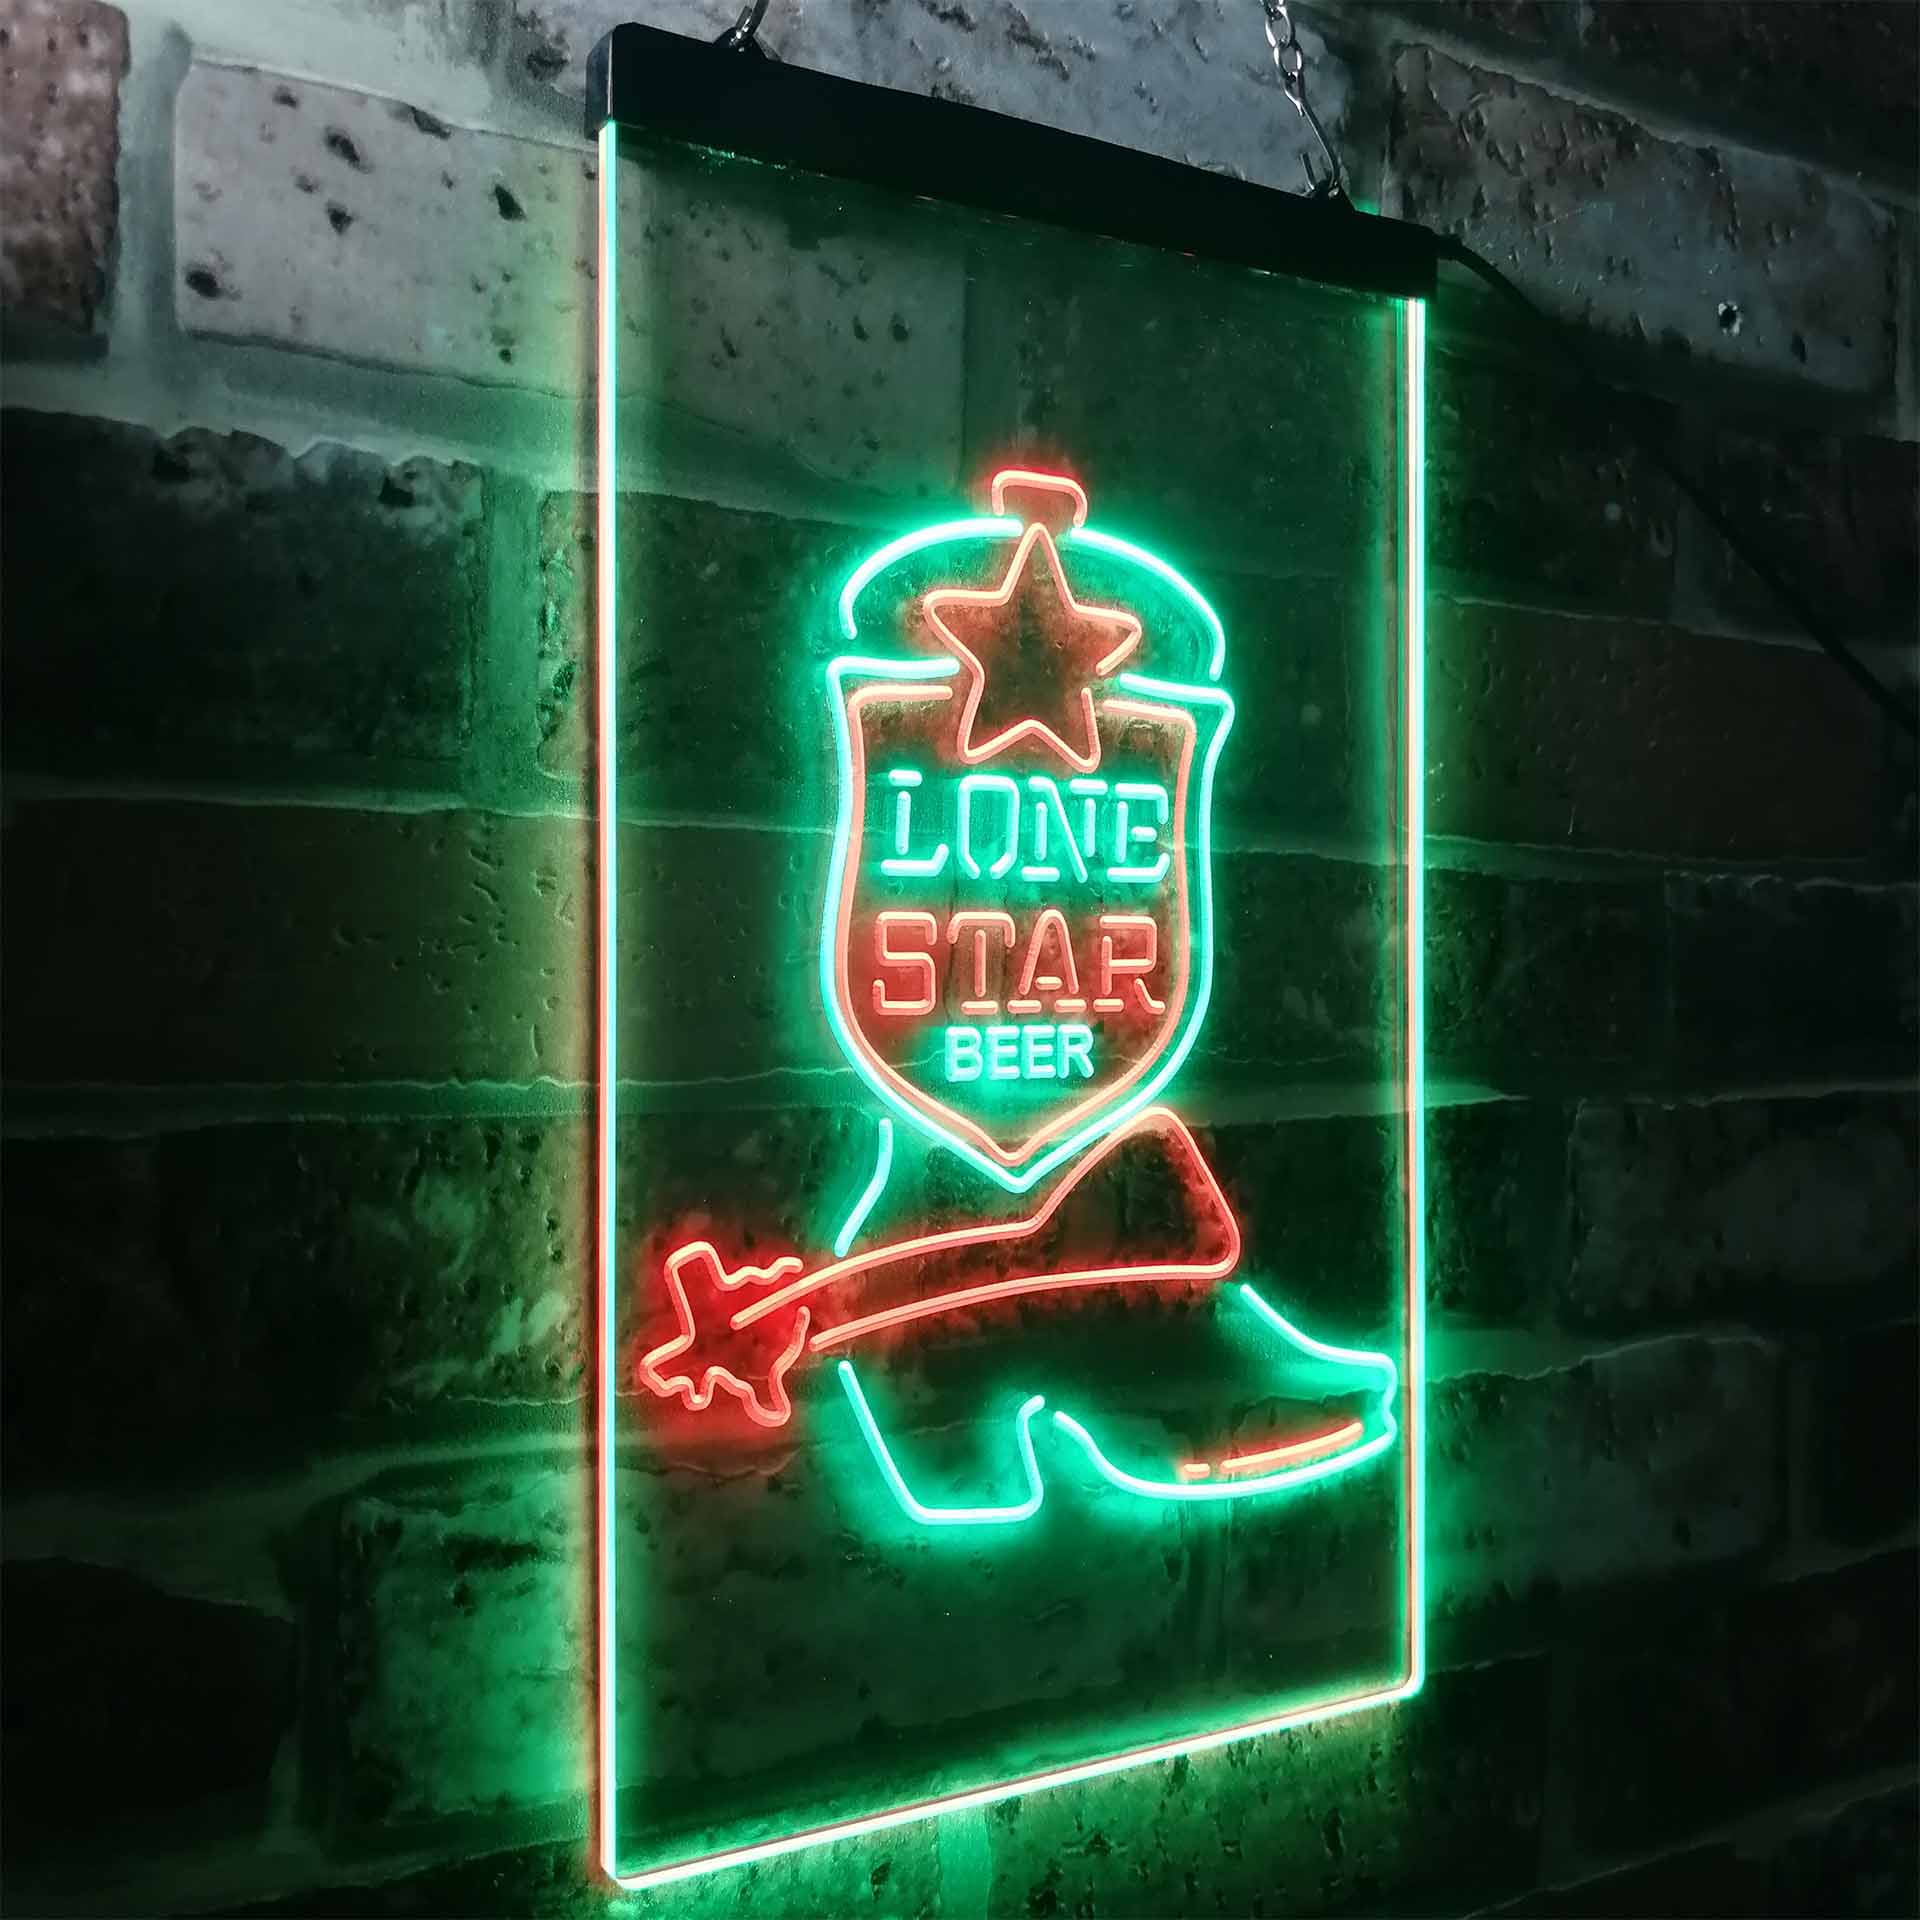 Lone Star Boot Beer Bar Neon LED Sign